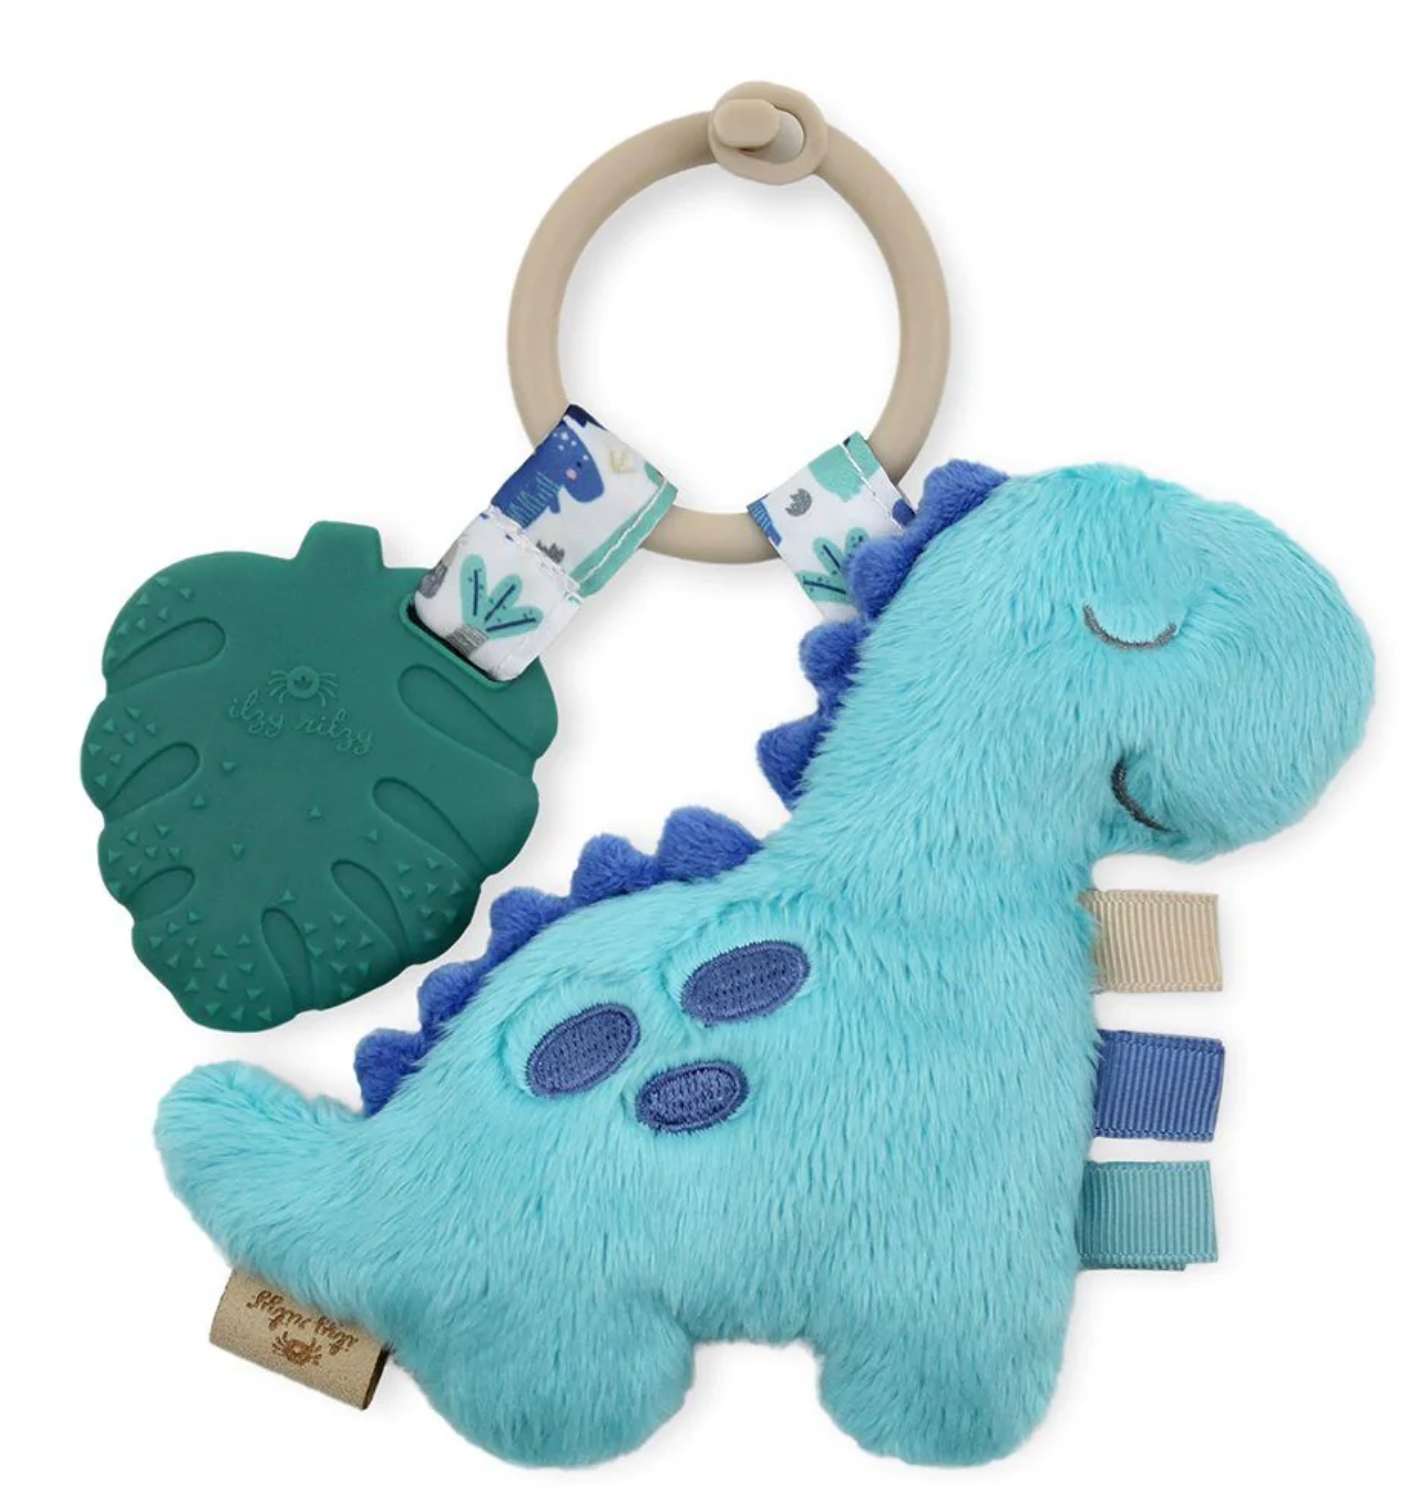 Plush and Teether Infant Toy